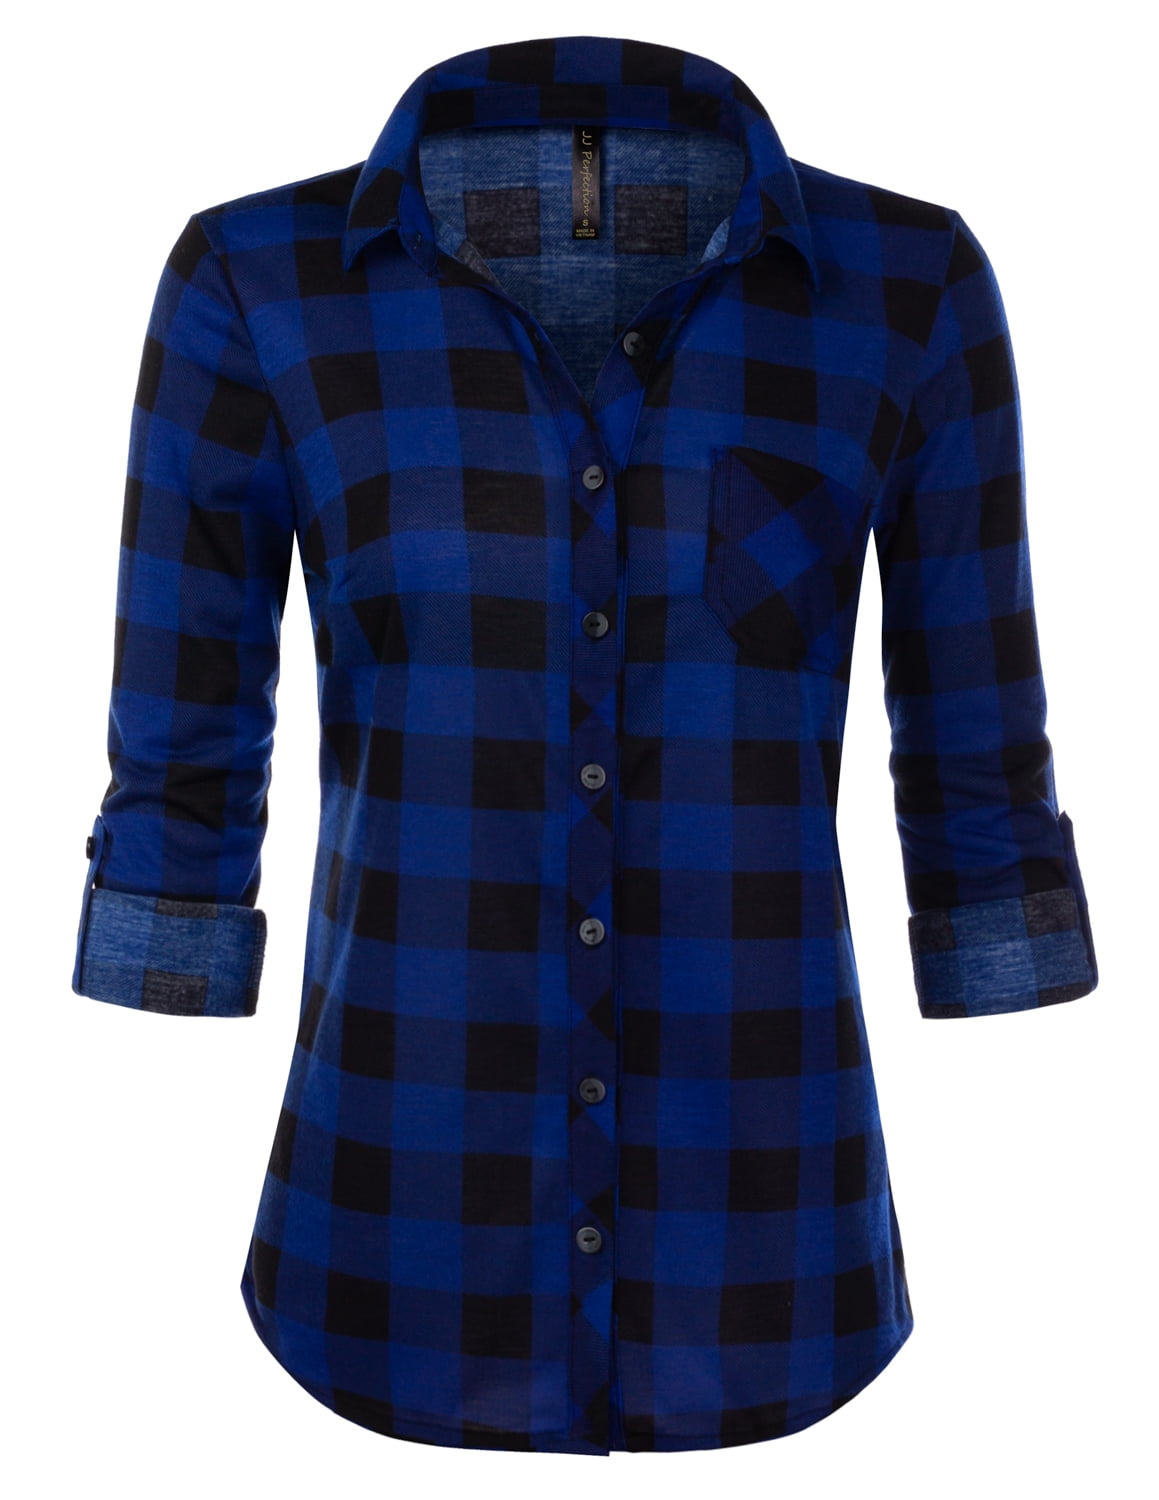 JJ Perfection Womens Long Sleeve Collared Button Down Plaid